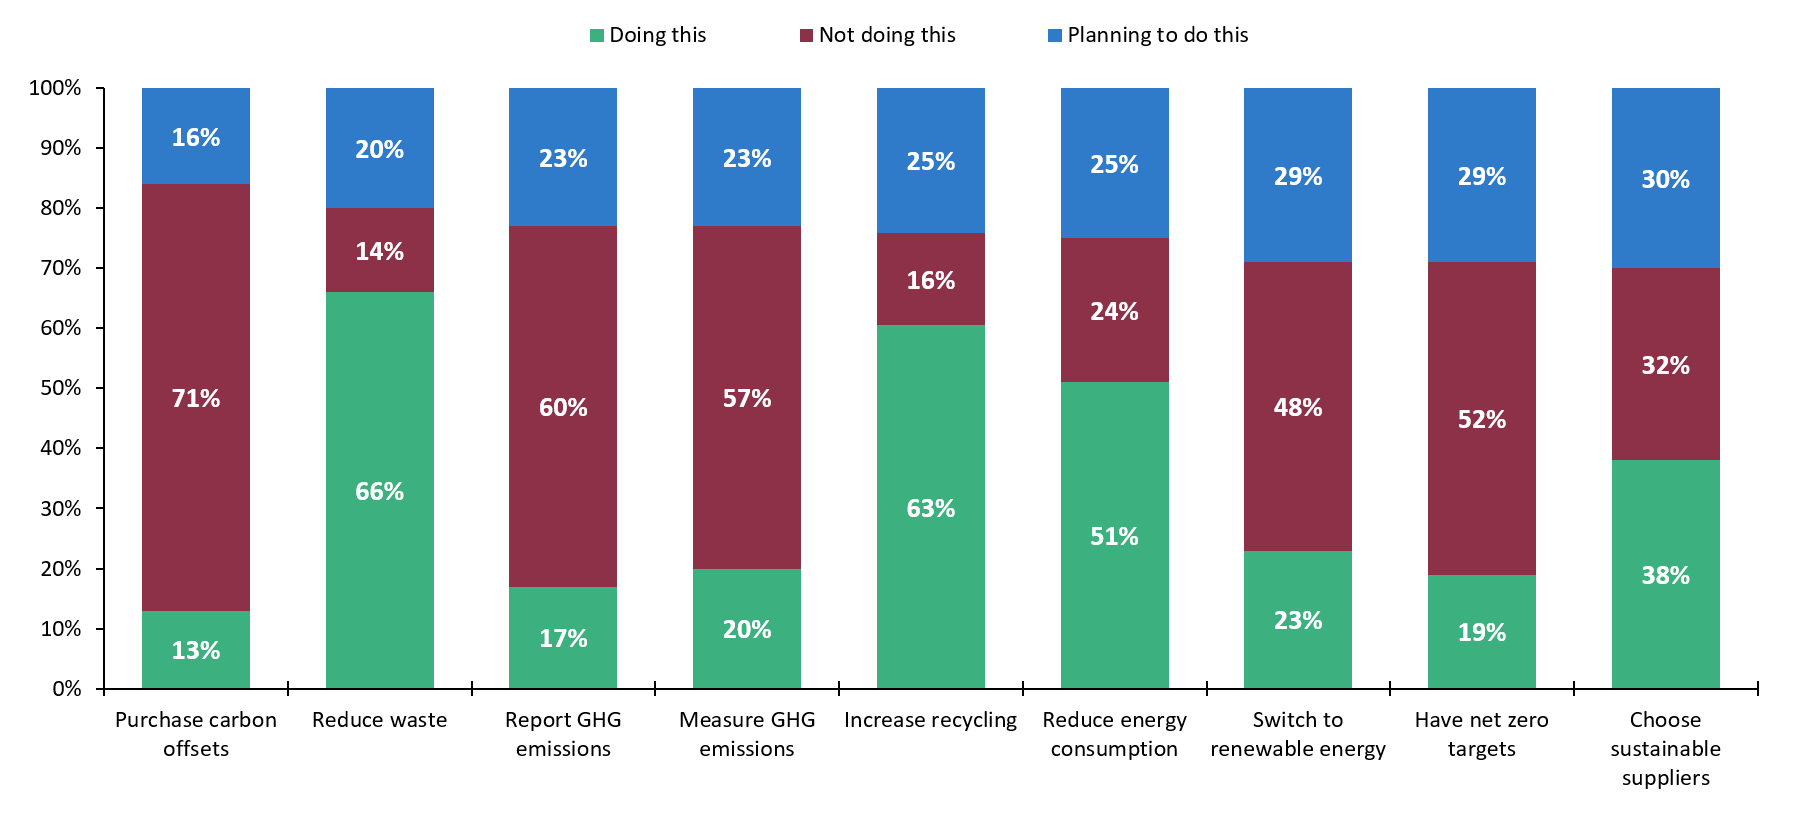 Majority of respondents taking initial steps to reduce GHG emissions.